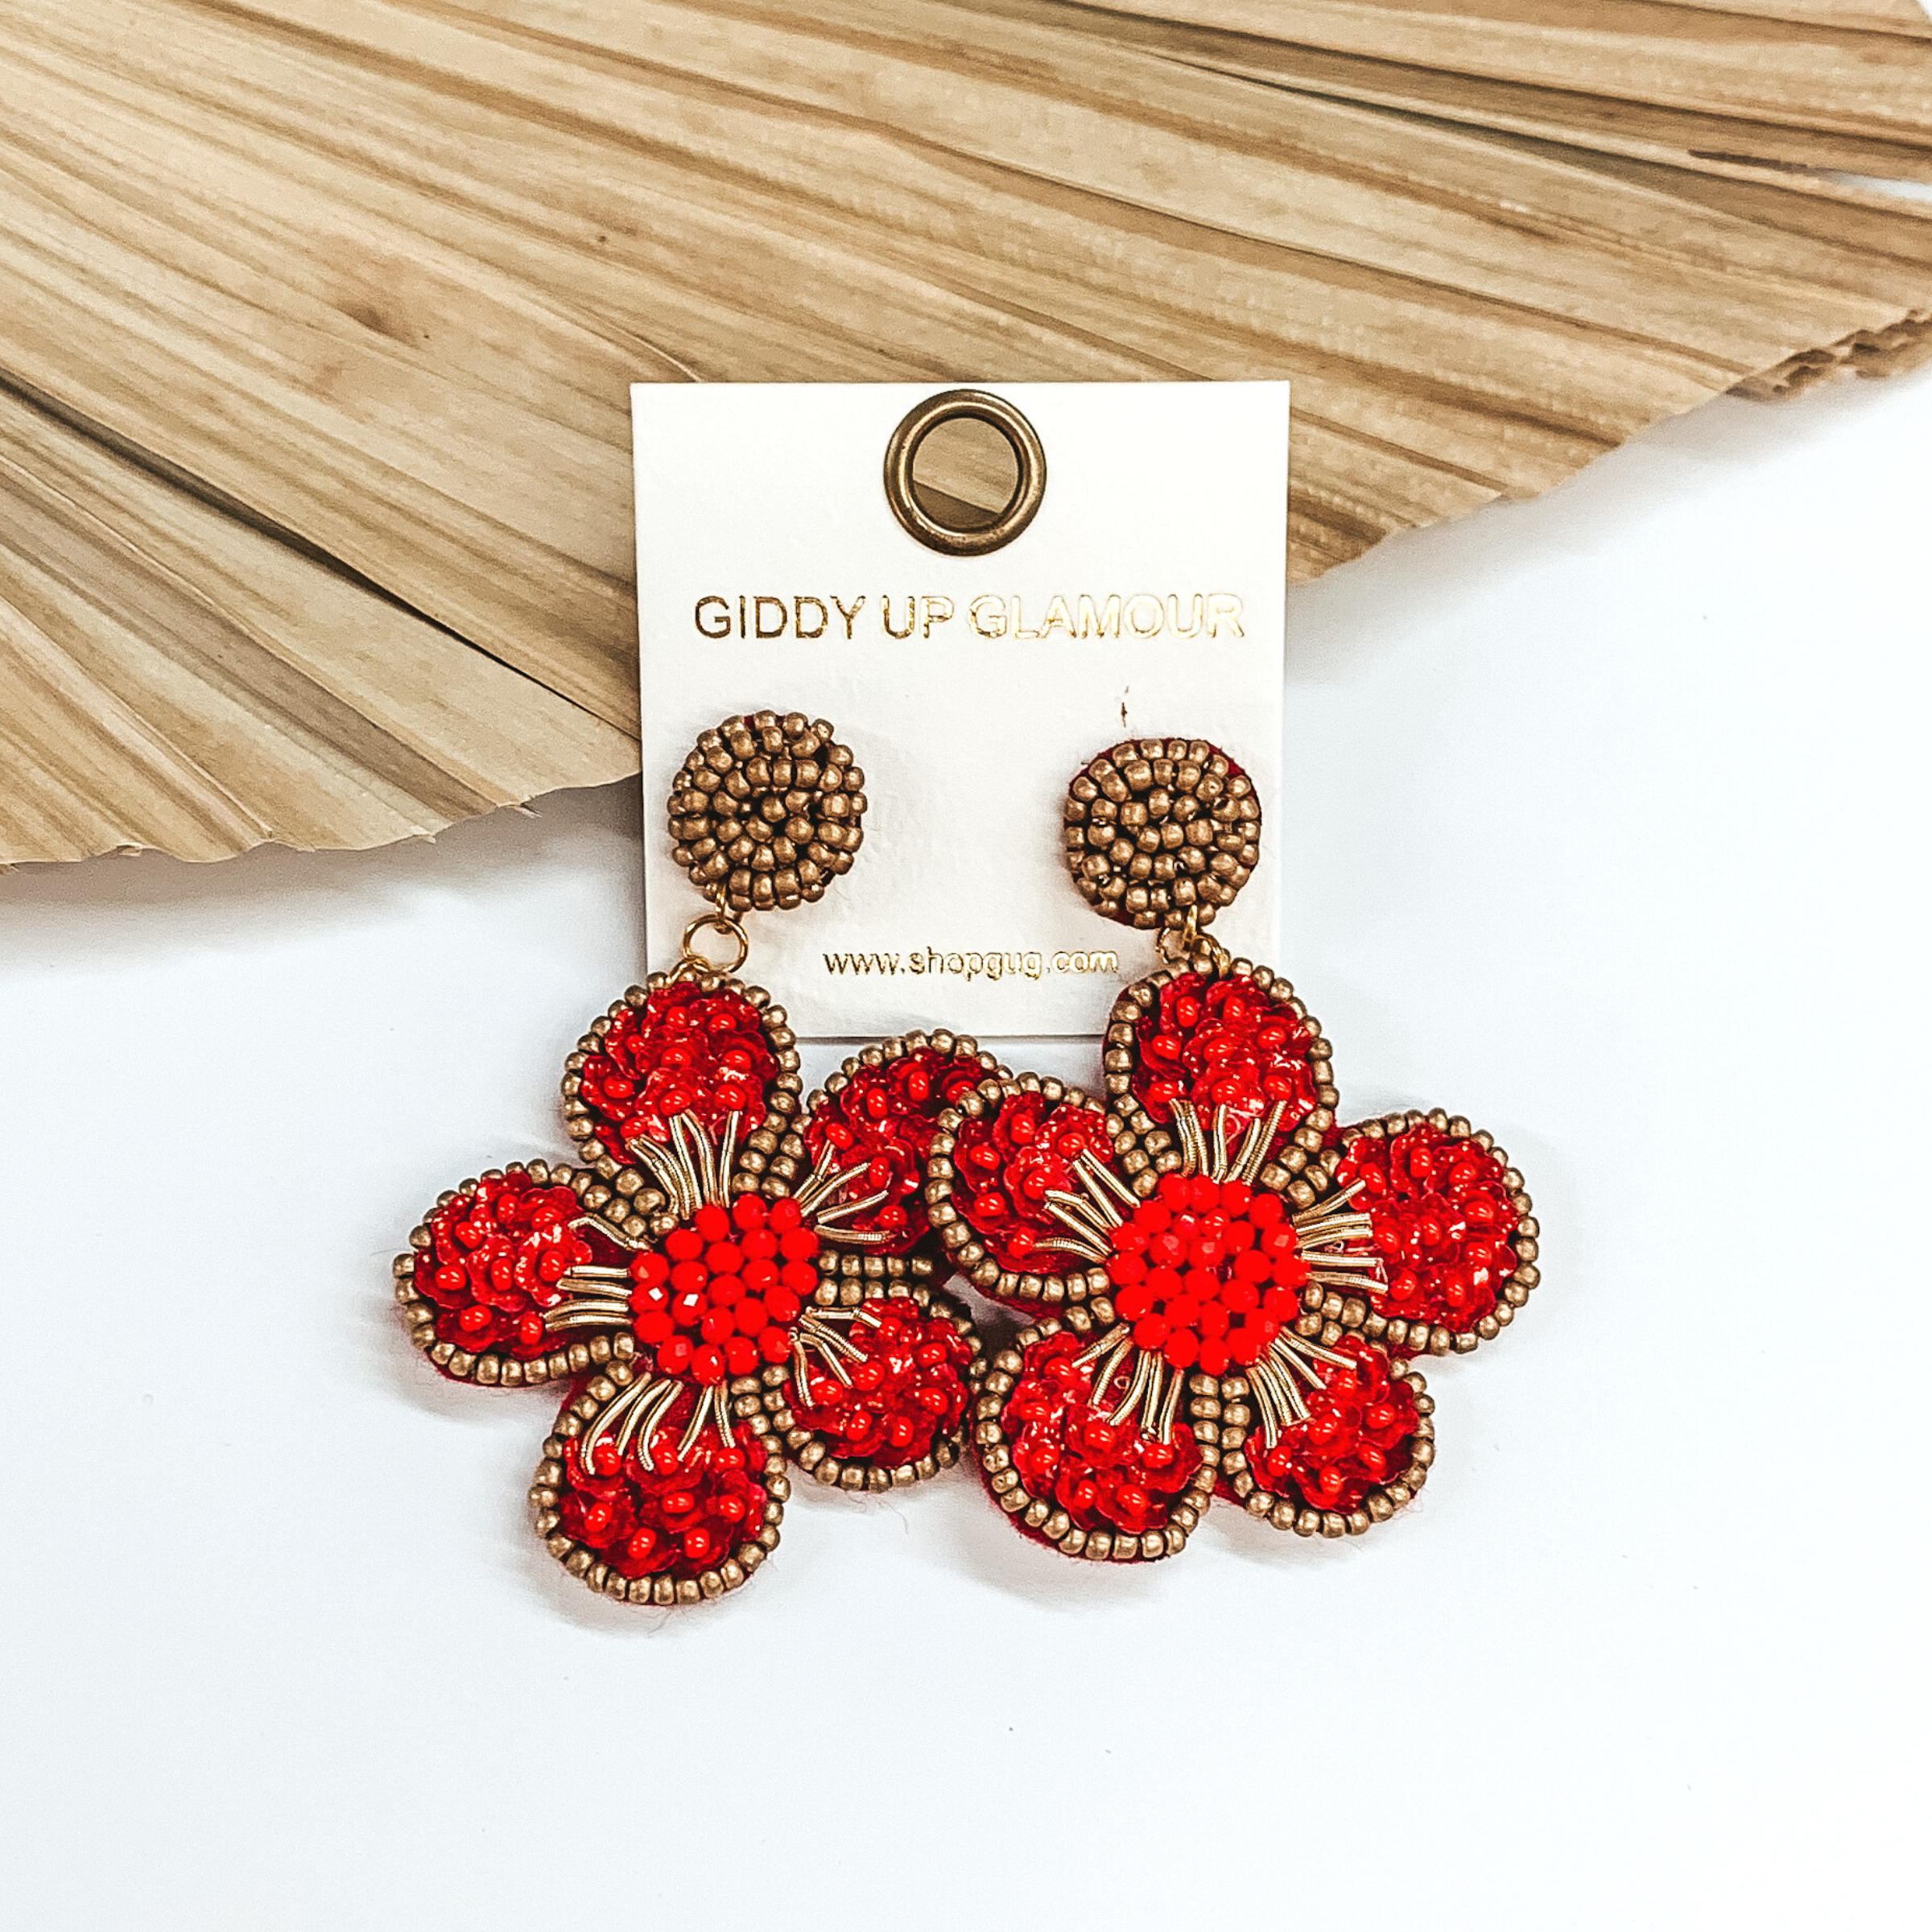 Gold beaded circle post back earrings. There is a hanging beaded flower pendant from the gold stud earrings. The flower pendant is red with a gold outline and detailing. These earrings are pictured on a white background with a dried palm leaf in the background. 